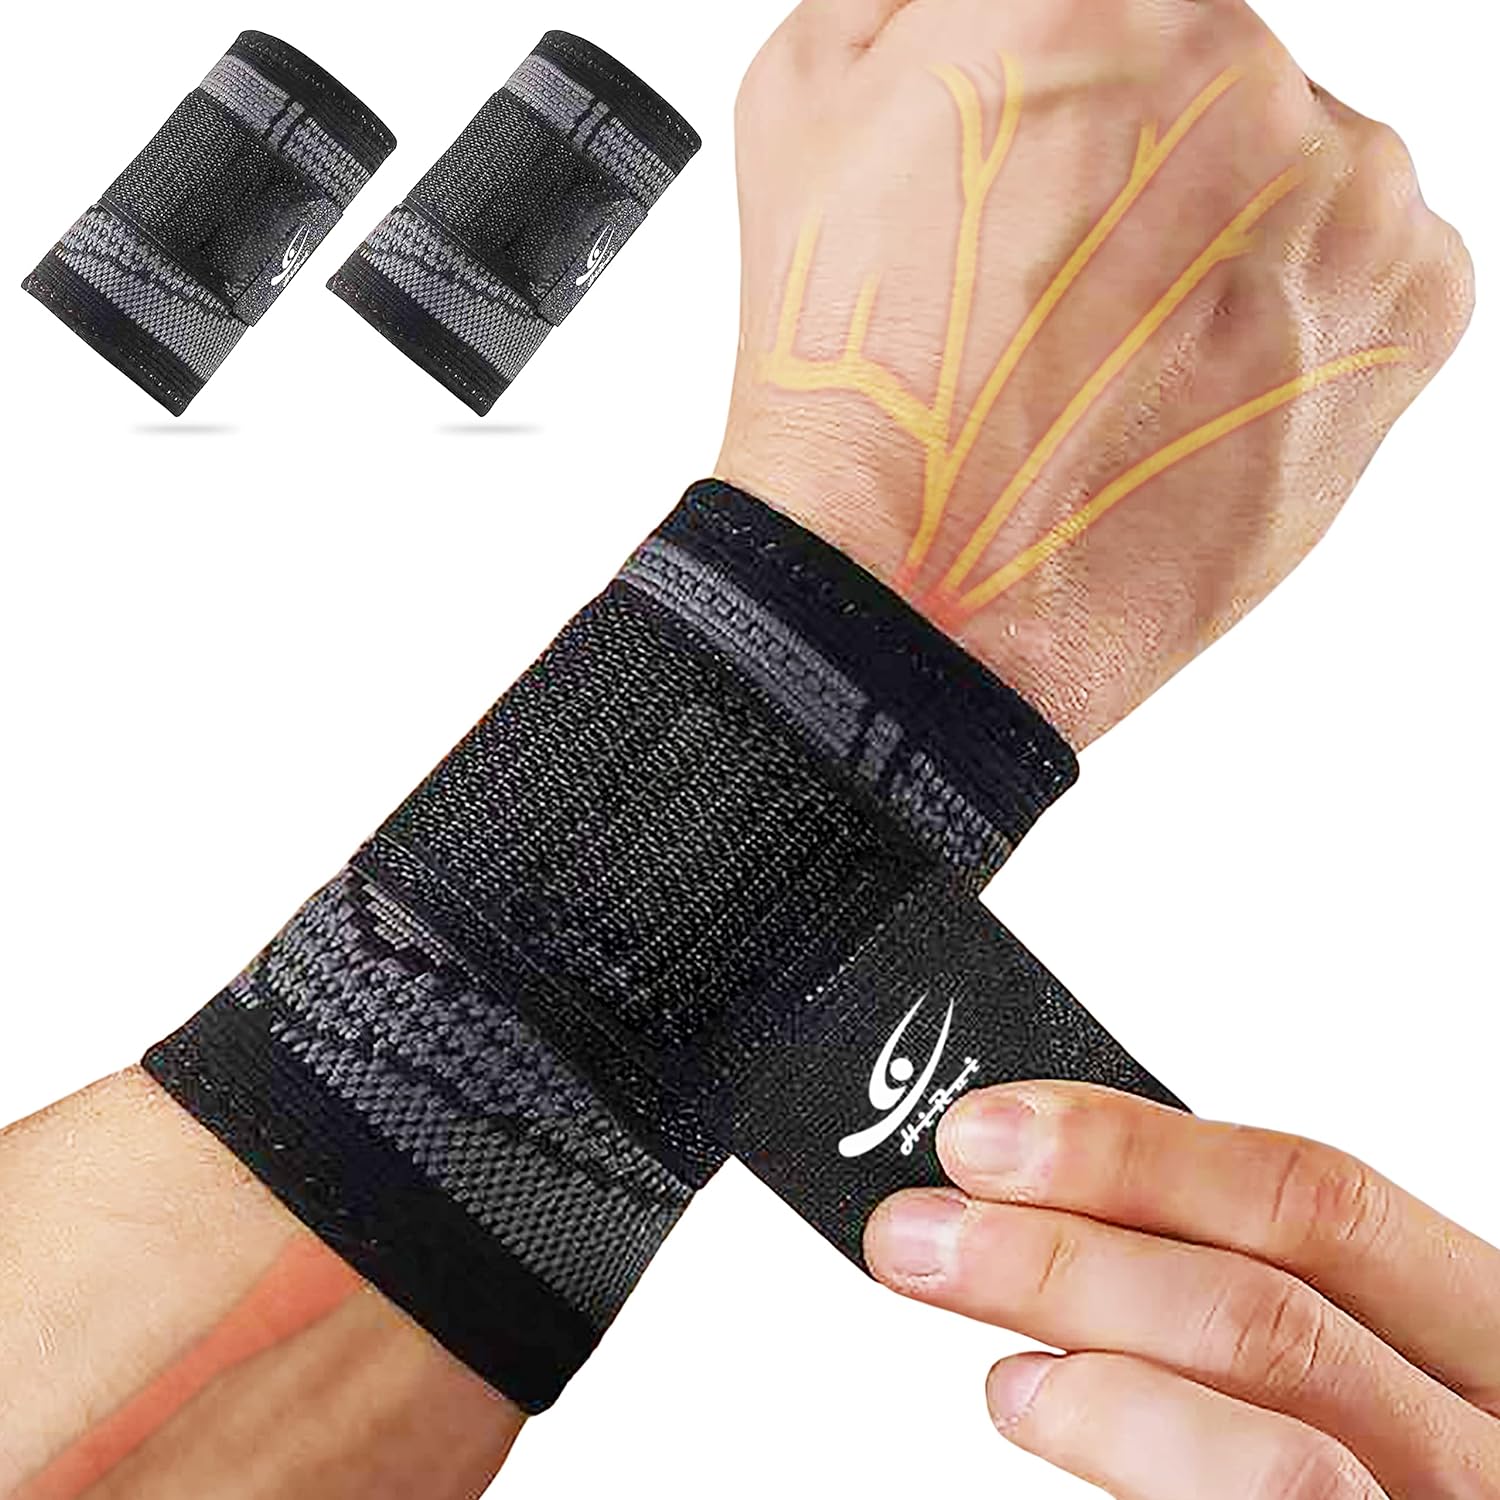 HiRui Wrist Brace/Wraps Wrist Compression Strap and Support for Work Fitness Weightlifting Sprains Tendonitis, Carpal Tunnel Arthritis, Pain Relief, Adjustable Wristbands 2 PACK (Black, M)